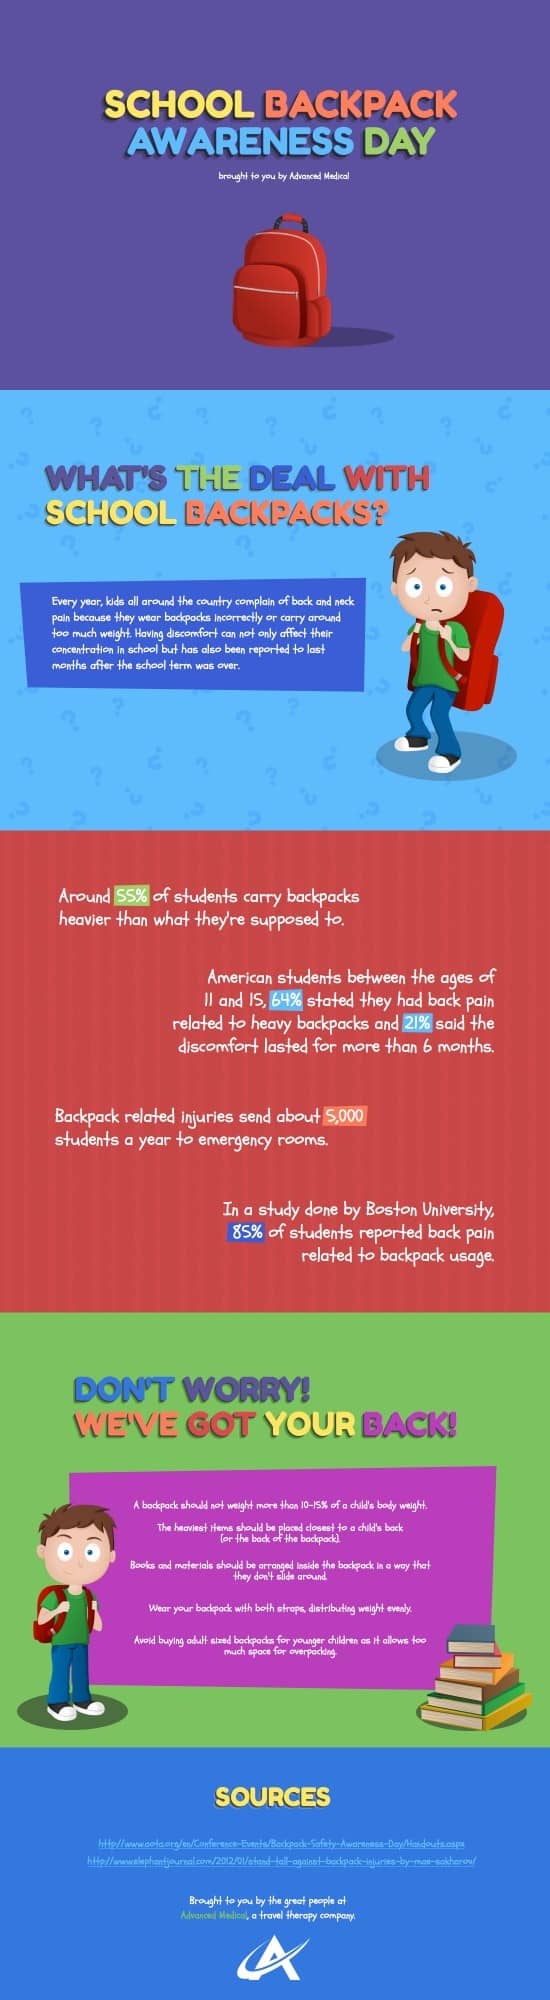 National School Backpack Awareness Day [infographic]